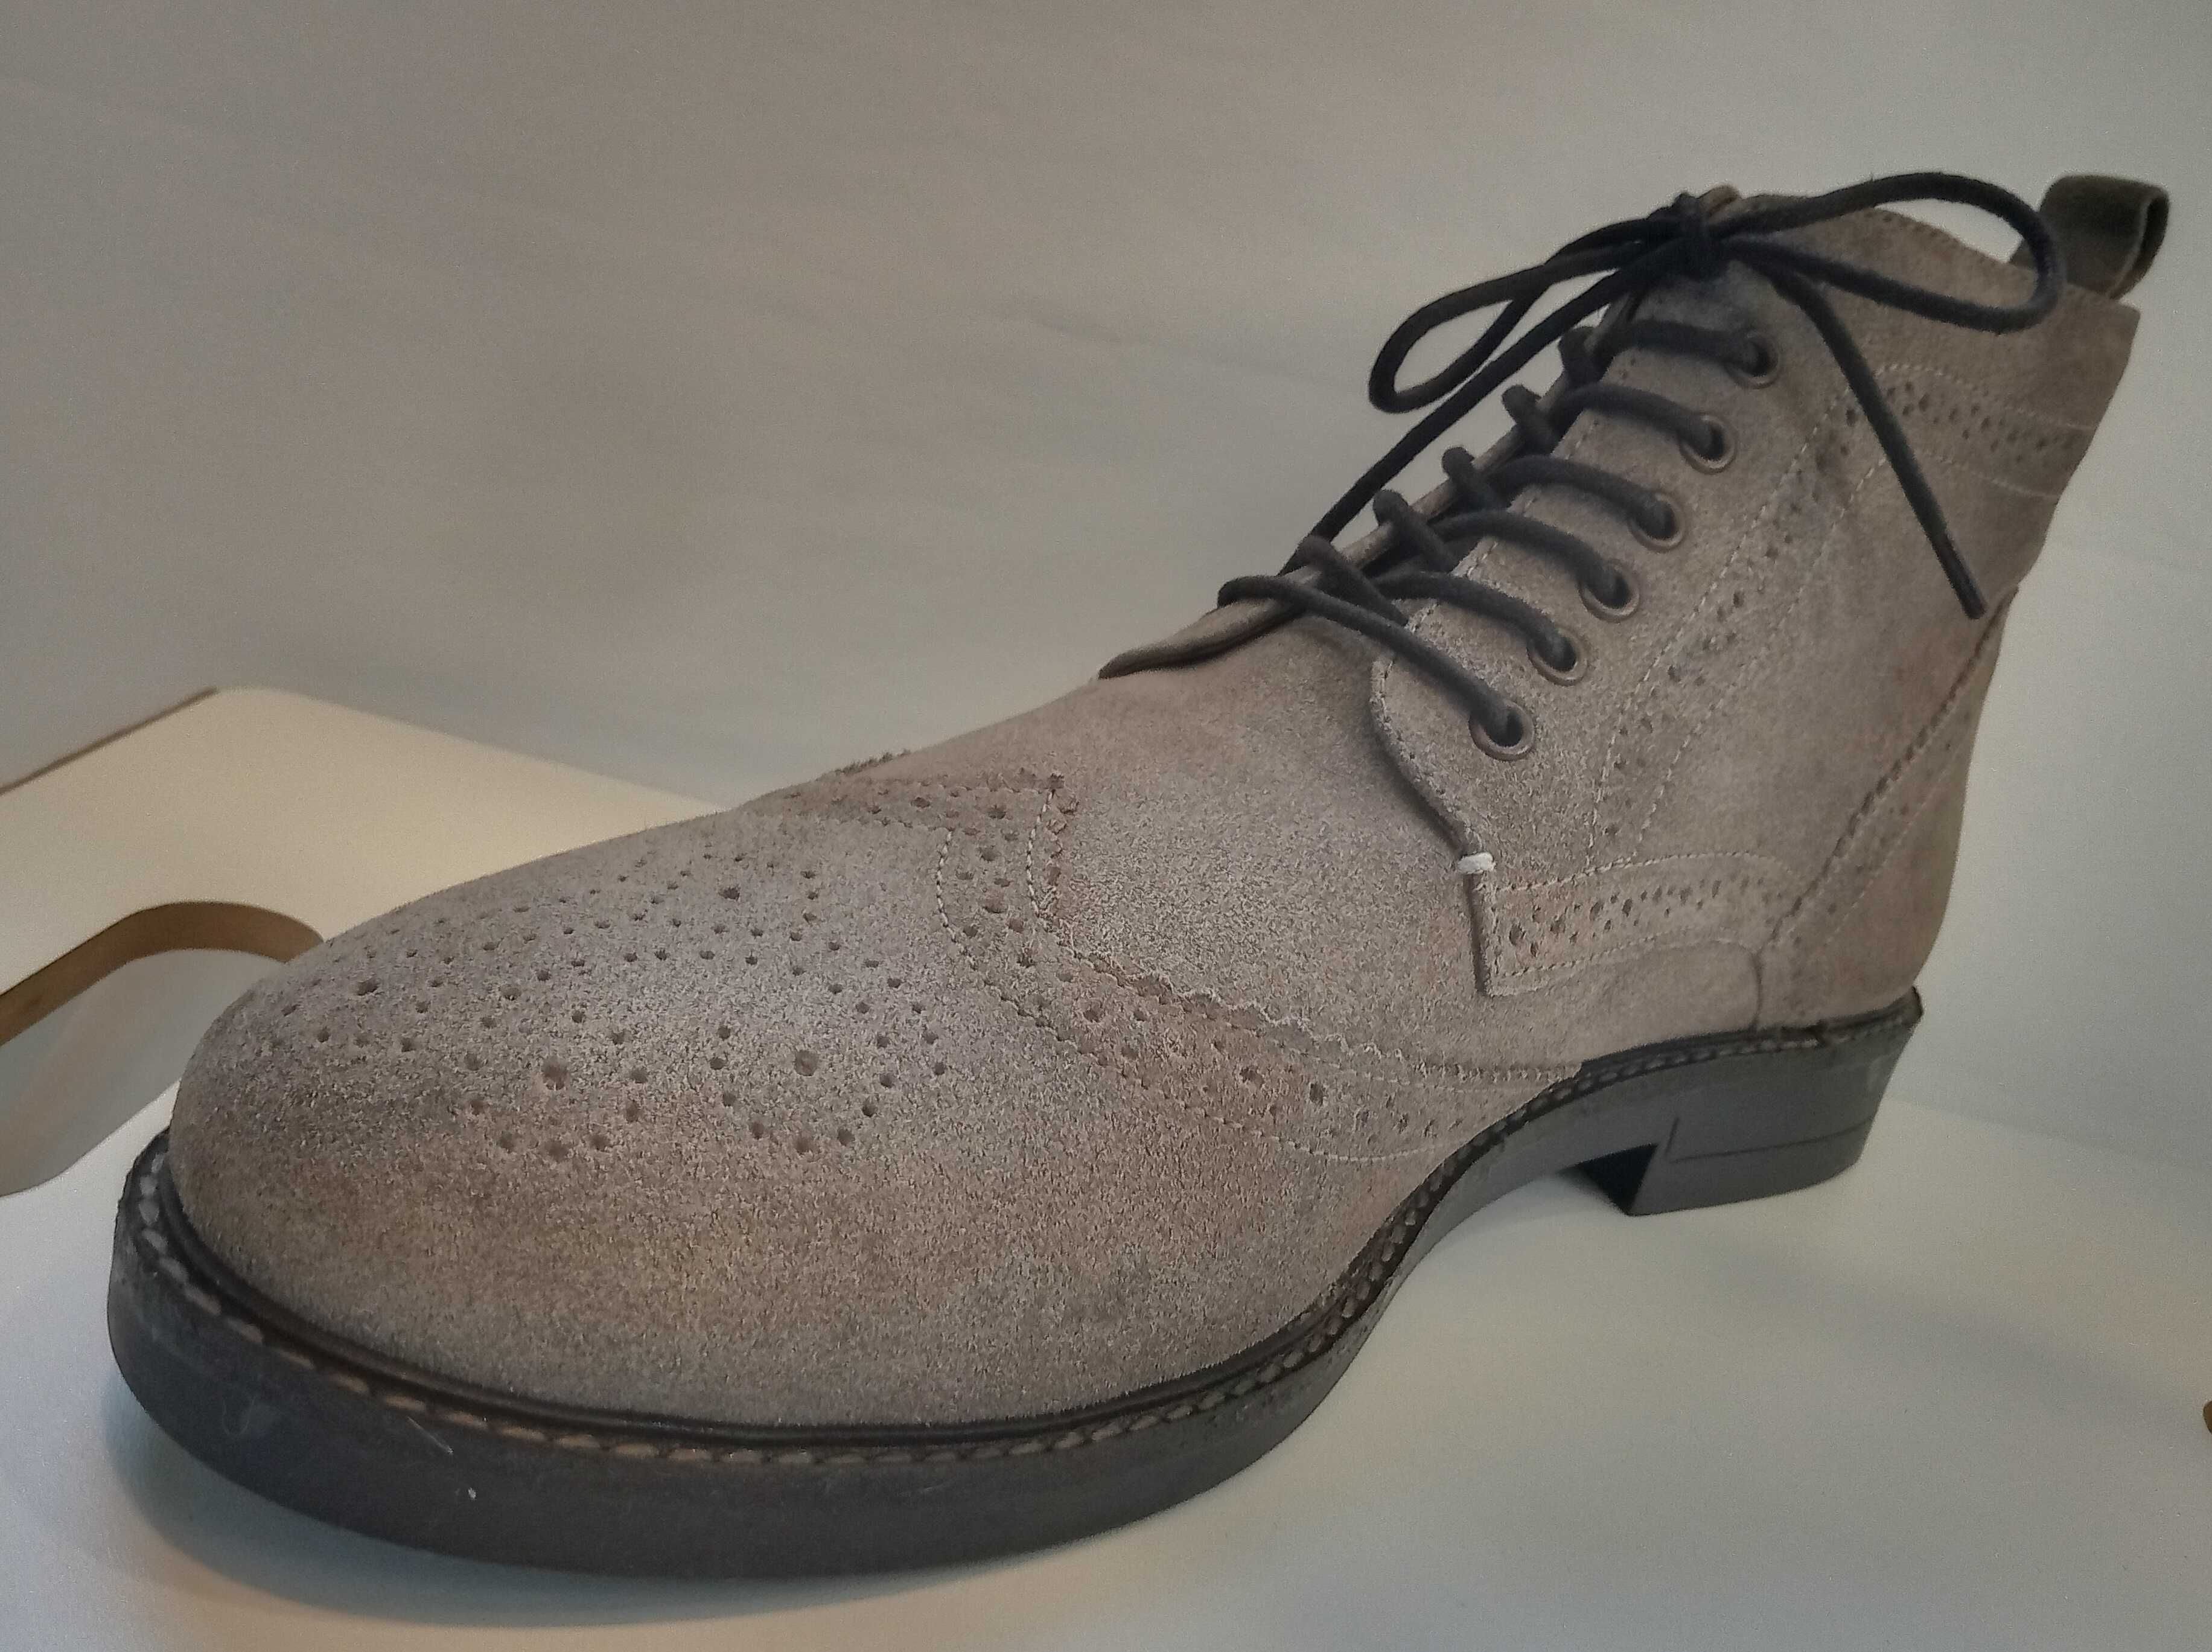 Ghete lace up wingtip Frank Wright 45 piele naturala moale